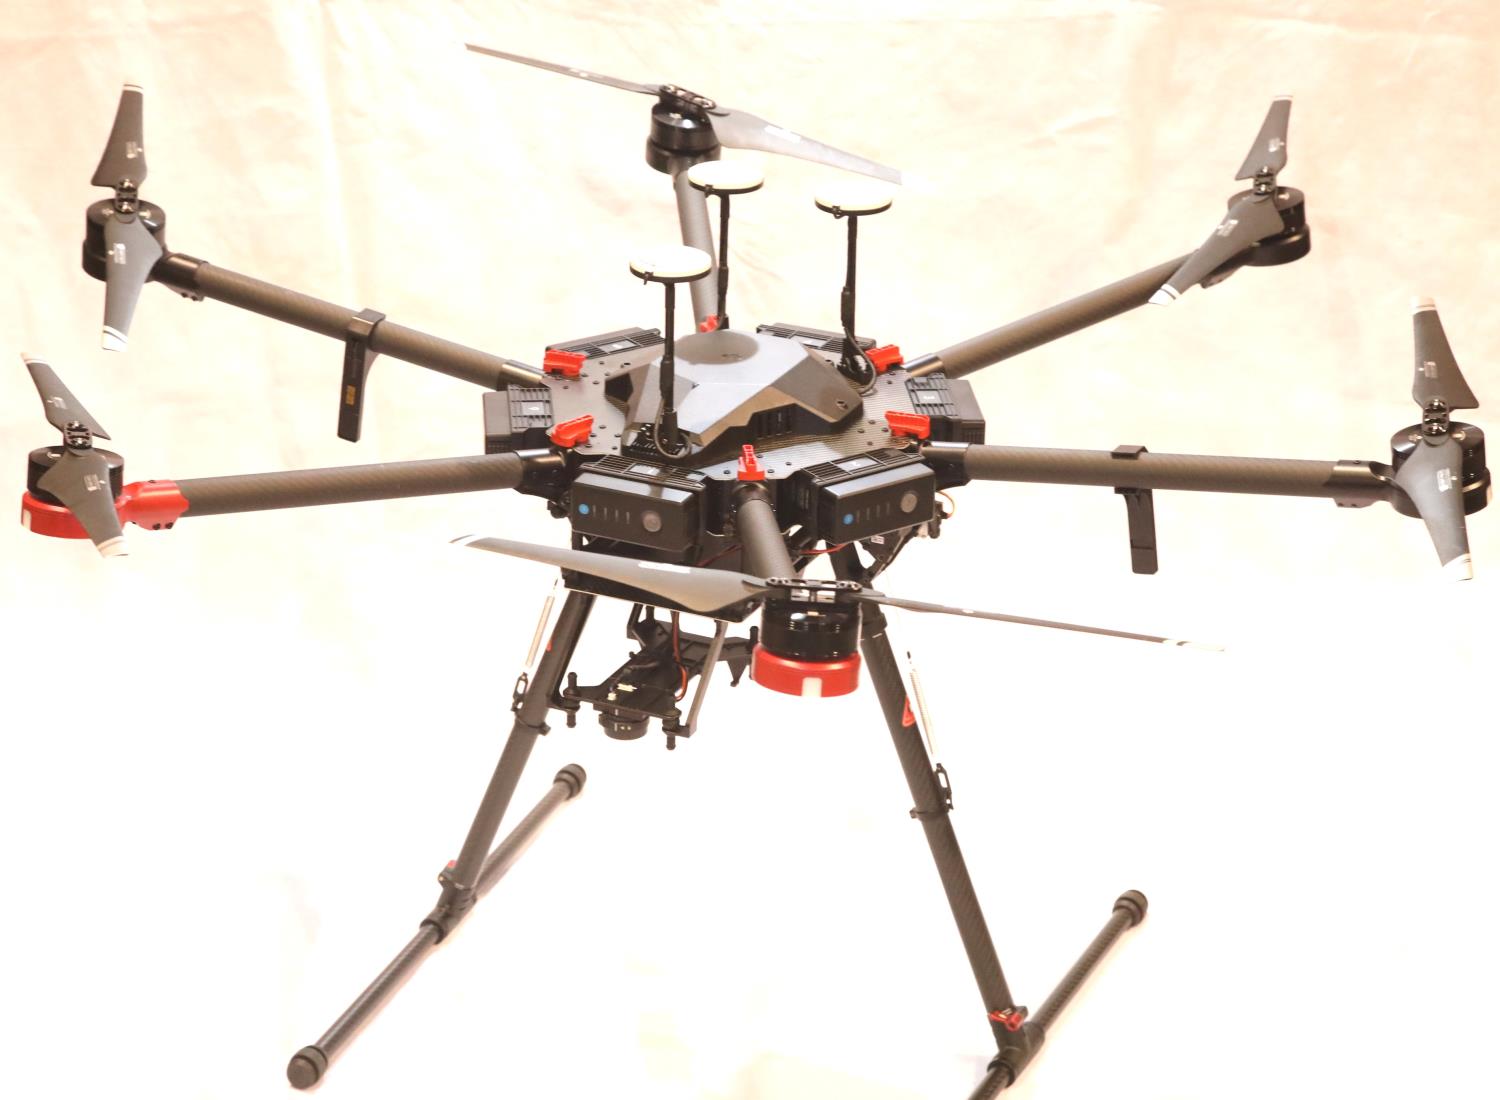 dji Matrice 600 Pro drone fitted with a Zenmuse X3 gimbal camera, with 6 x TB47X batteries, 2 x